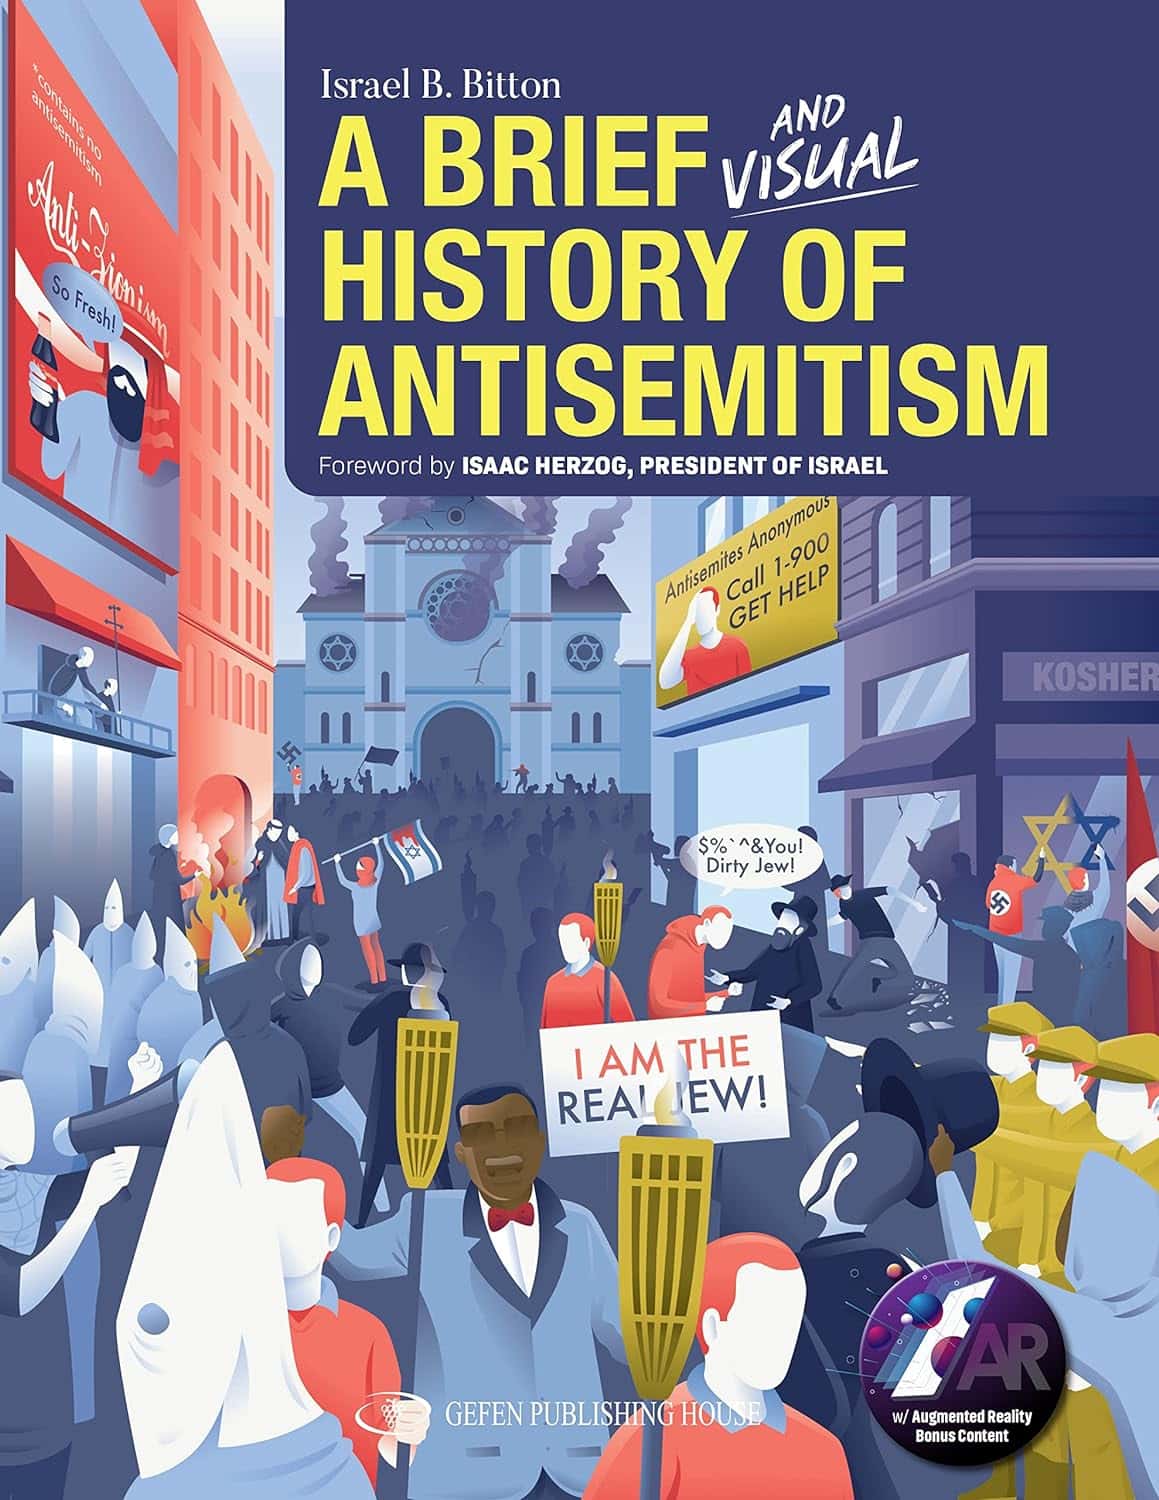 A Brief History of Antisemitism by Israel B. Bitton